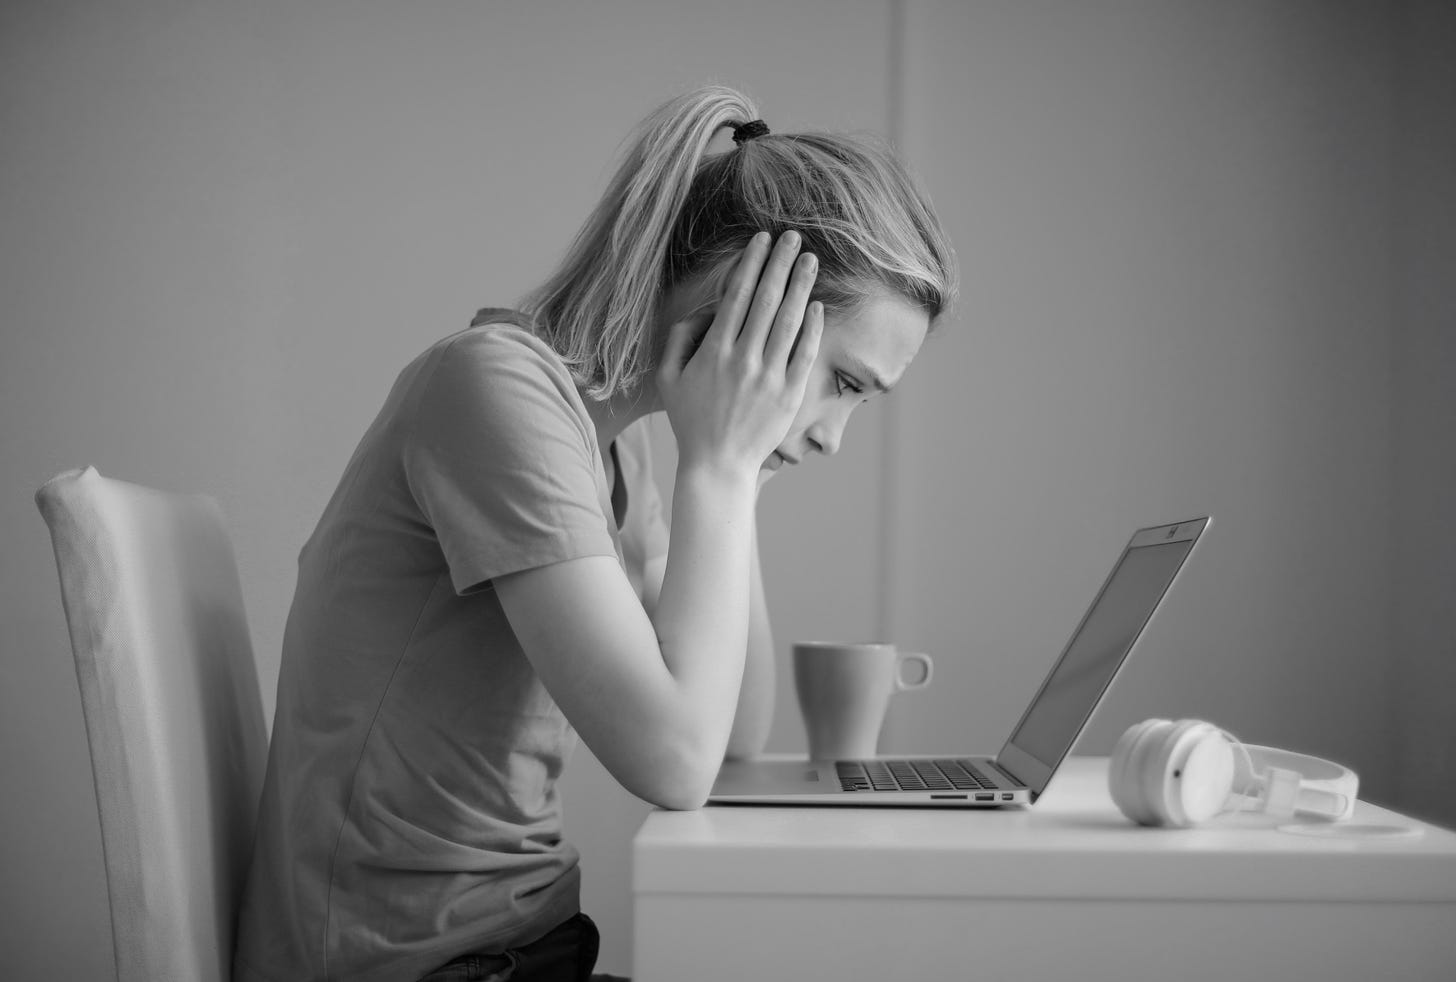 A slender young woman with her hands to her face, looks worried as she stares into her laptop computer screen